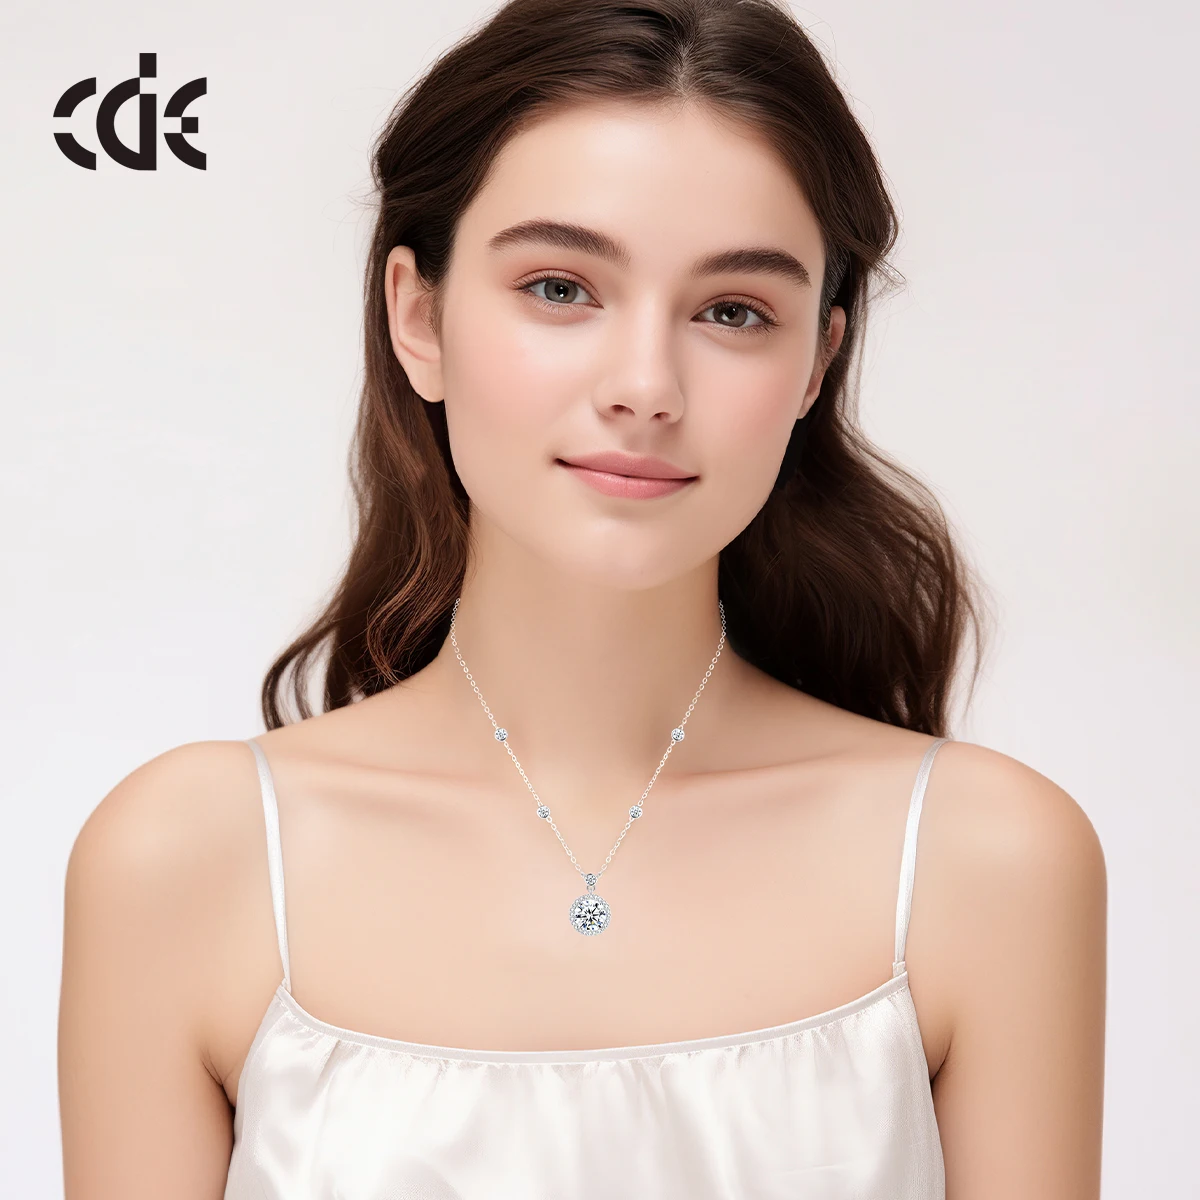 CDE WYN4 Fine 925S Silver Jewelry Necklace Wholesale Round 5A Cubic Zirconia Pendant Rhodium Plated Chain Women Pendant Necklace